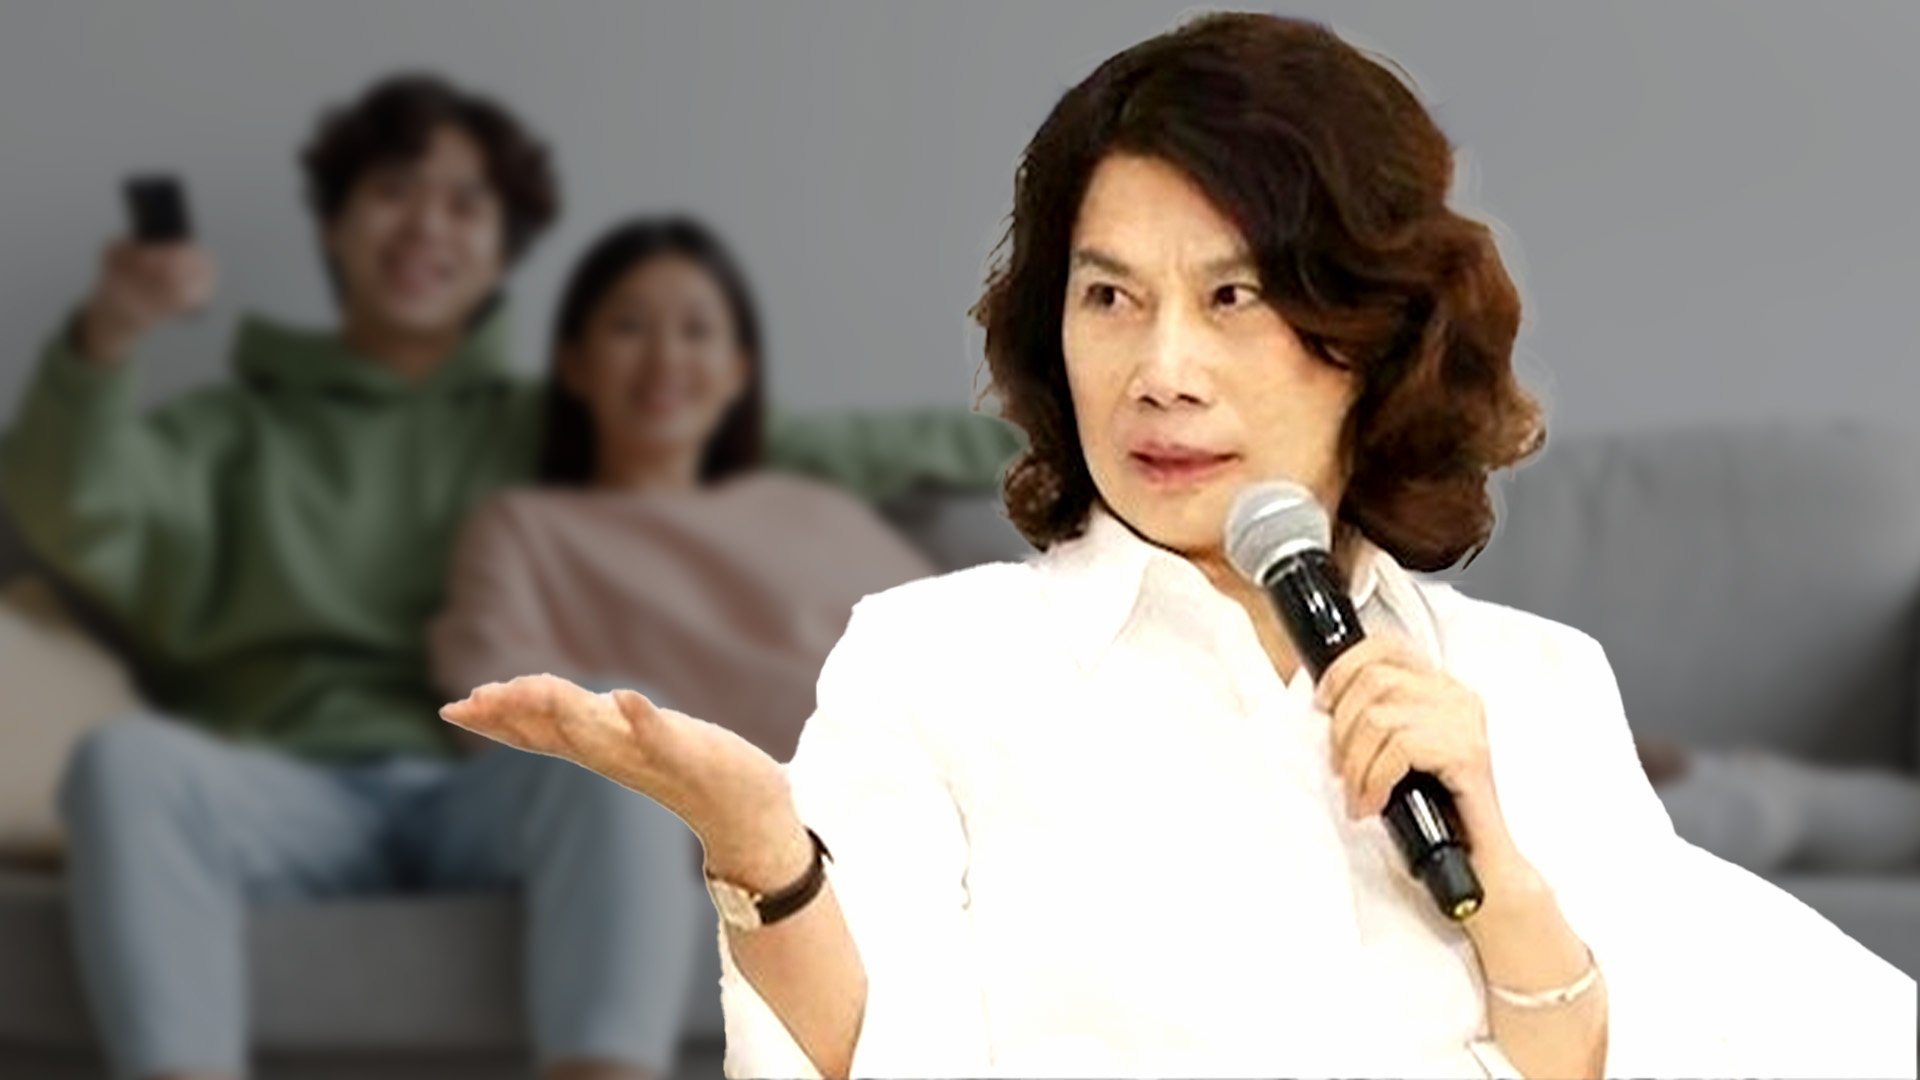 The Post profiles Dong Mingzhu, one of China’s richest, and most controversial, women who is known for her domineering style of leadership and strong views about work culture. Photo: SCMP composite/Shutterstock/Weibo